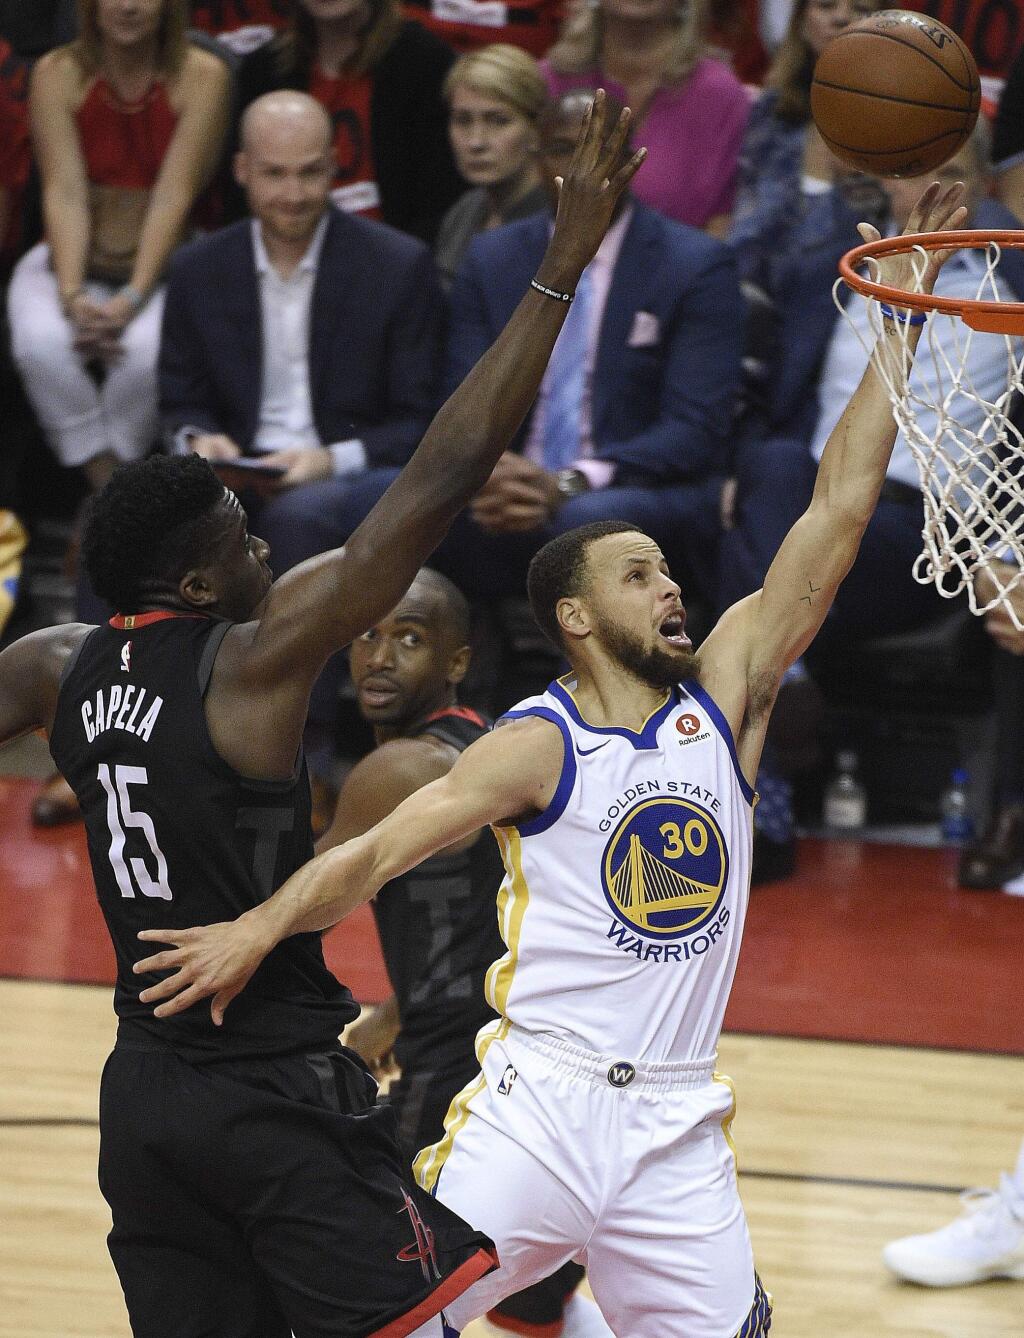 Golden State Warriors guard Stephen Curry (30) drives to the basket as Houston Rockets center Clint Capela (15) defends during the first half of Game 2 of the NBA basketball playoffs Western Conference finals Wednesday, May 16, 2018, in Houston. (AP Photo/Eric Christian Smith)